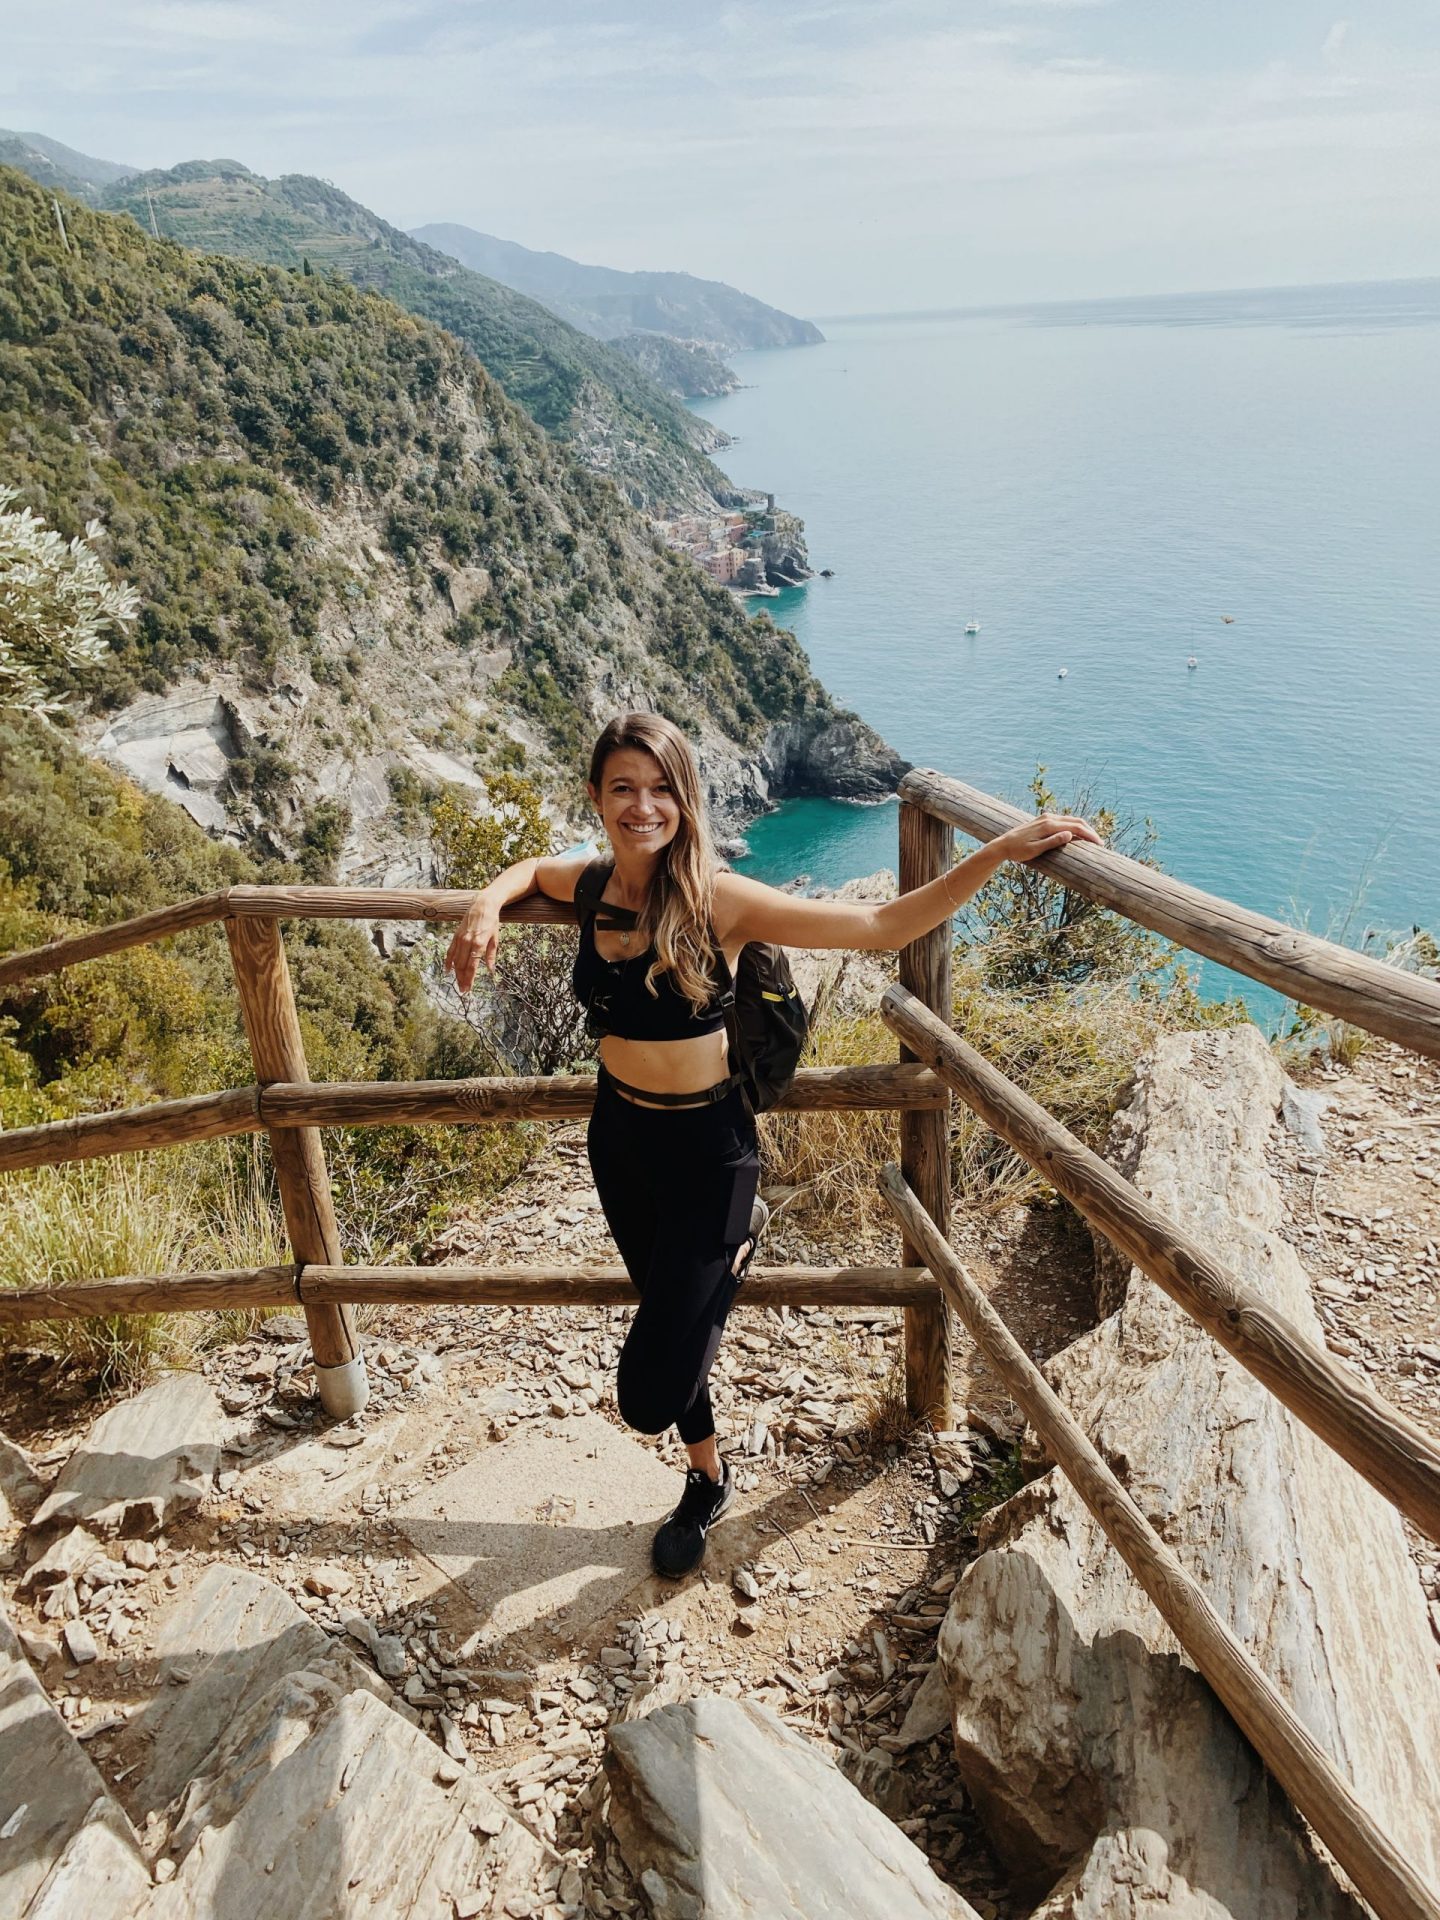 A Guide to Hike in the Cinque Terre, Italy